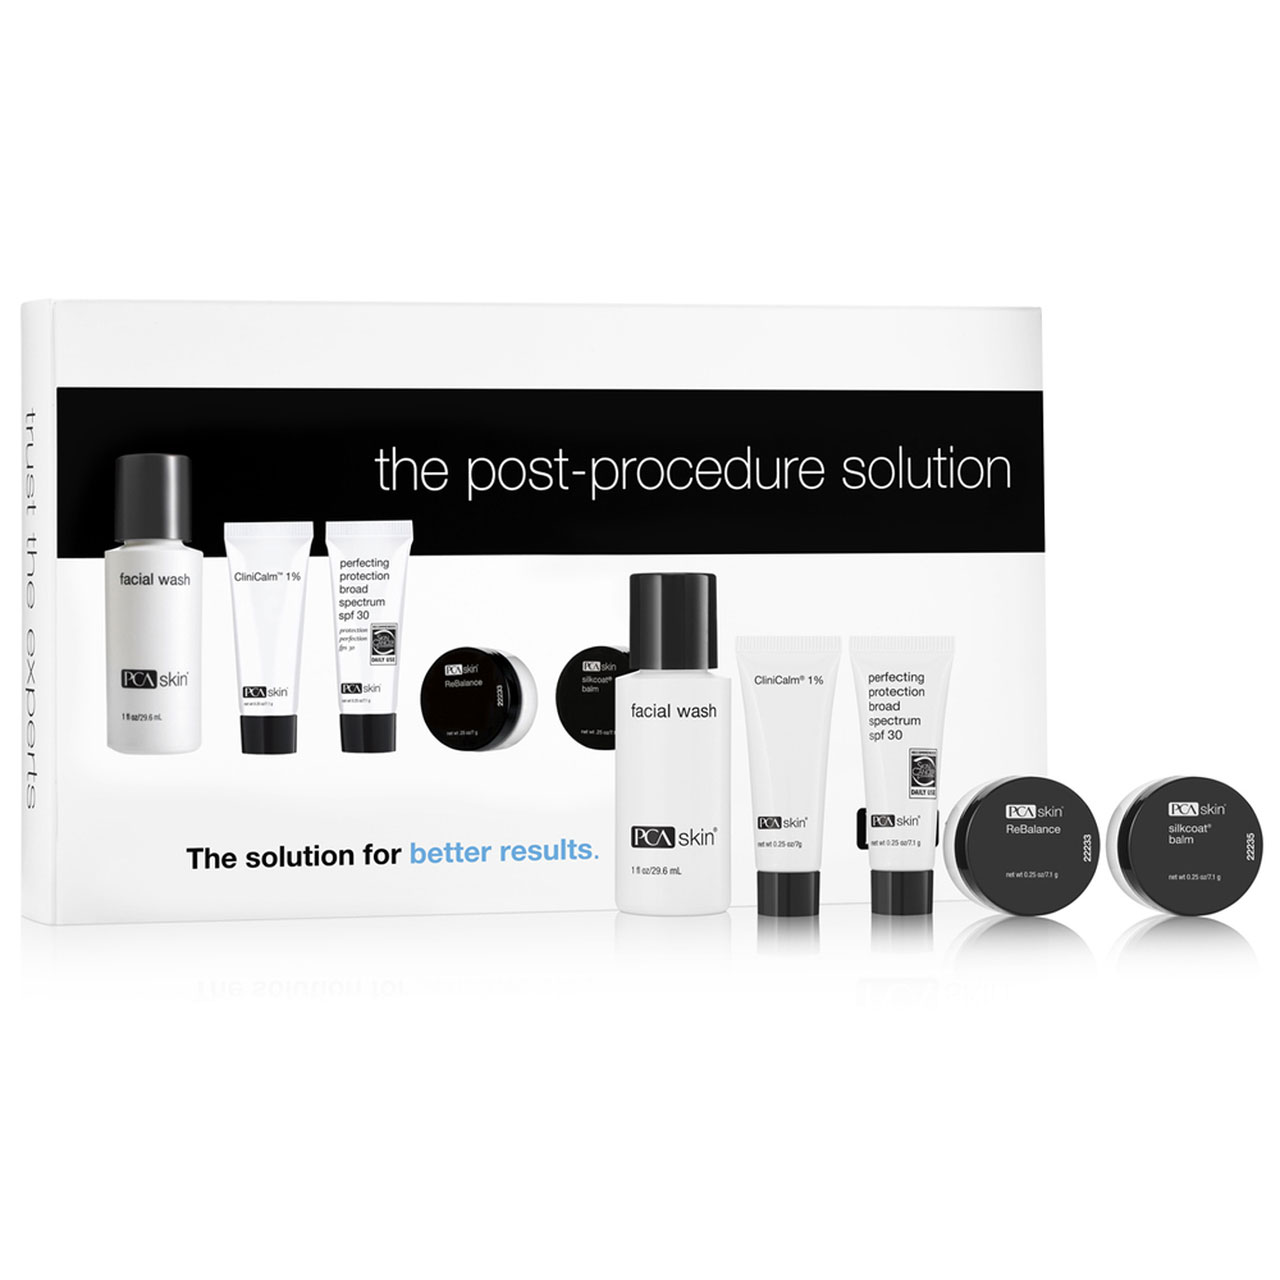 PCA Skin The Post-Procedure Solution Kit Questions & Answers